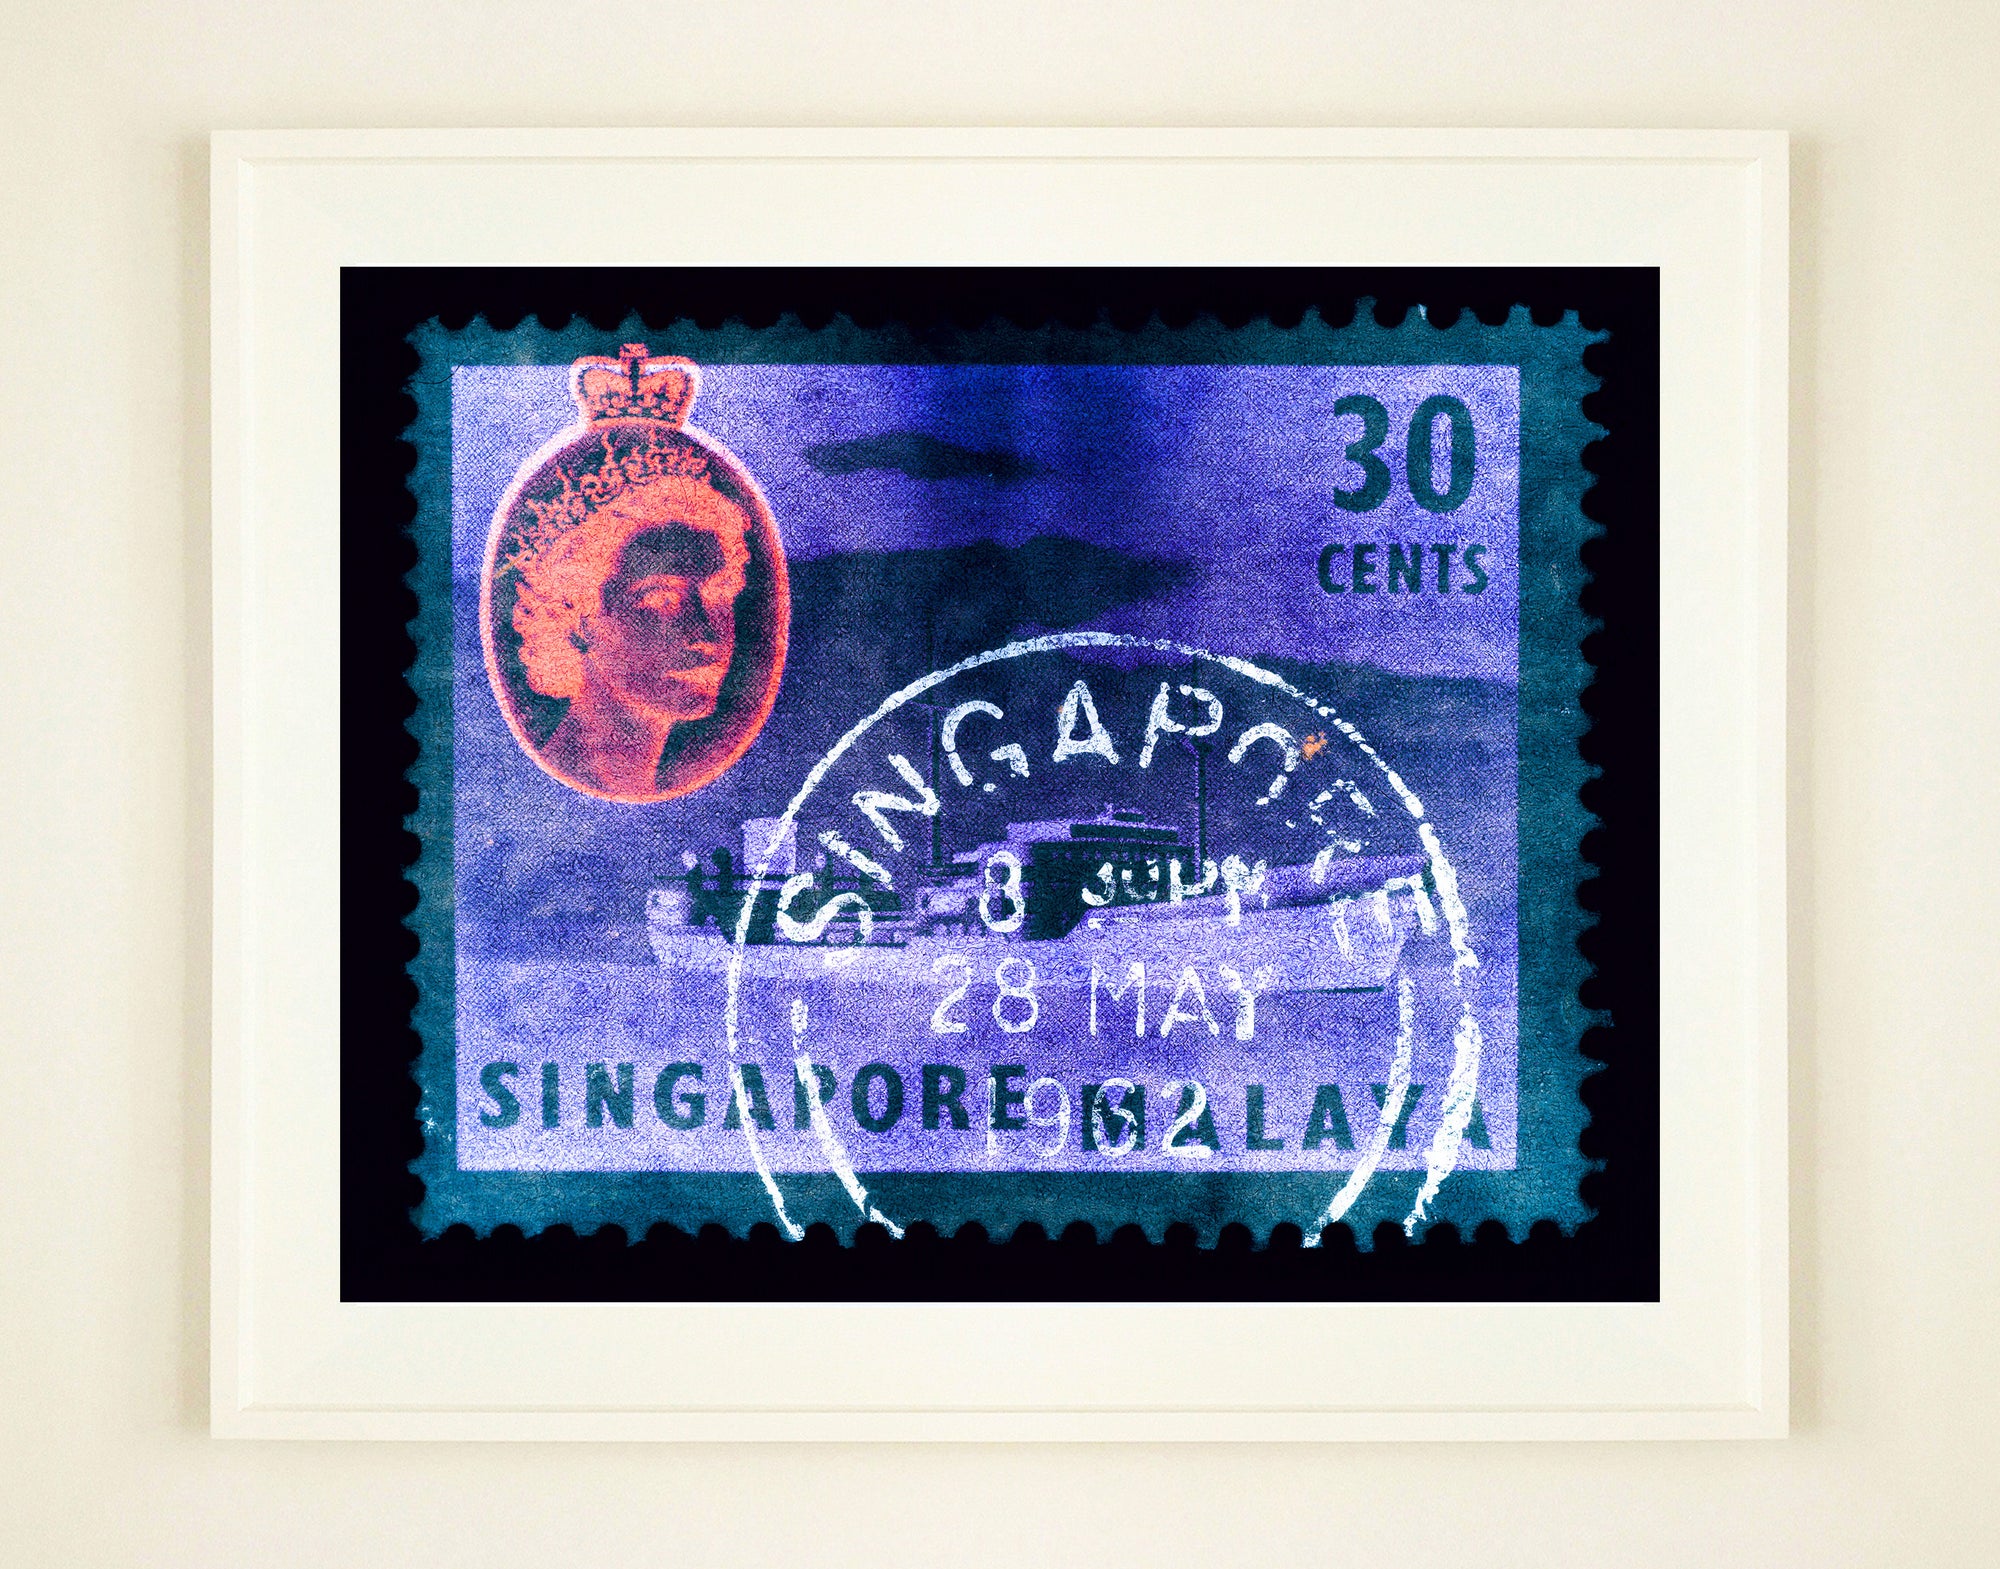 30 cents QEII Oil Tanker (Teal). These historic postage stamps that make up the Heidler & Heeps Stamp Collection, Singapore Series “Postcards from Afar” have been given a twenty-first century pop art lease of life. The fine detailed tapestry of the original small postage stamp has been brought to life, made unique by the franking stamp and Heidler & Heeps specialist darkroom process.